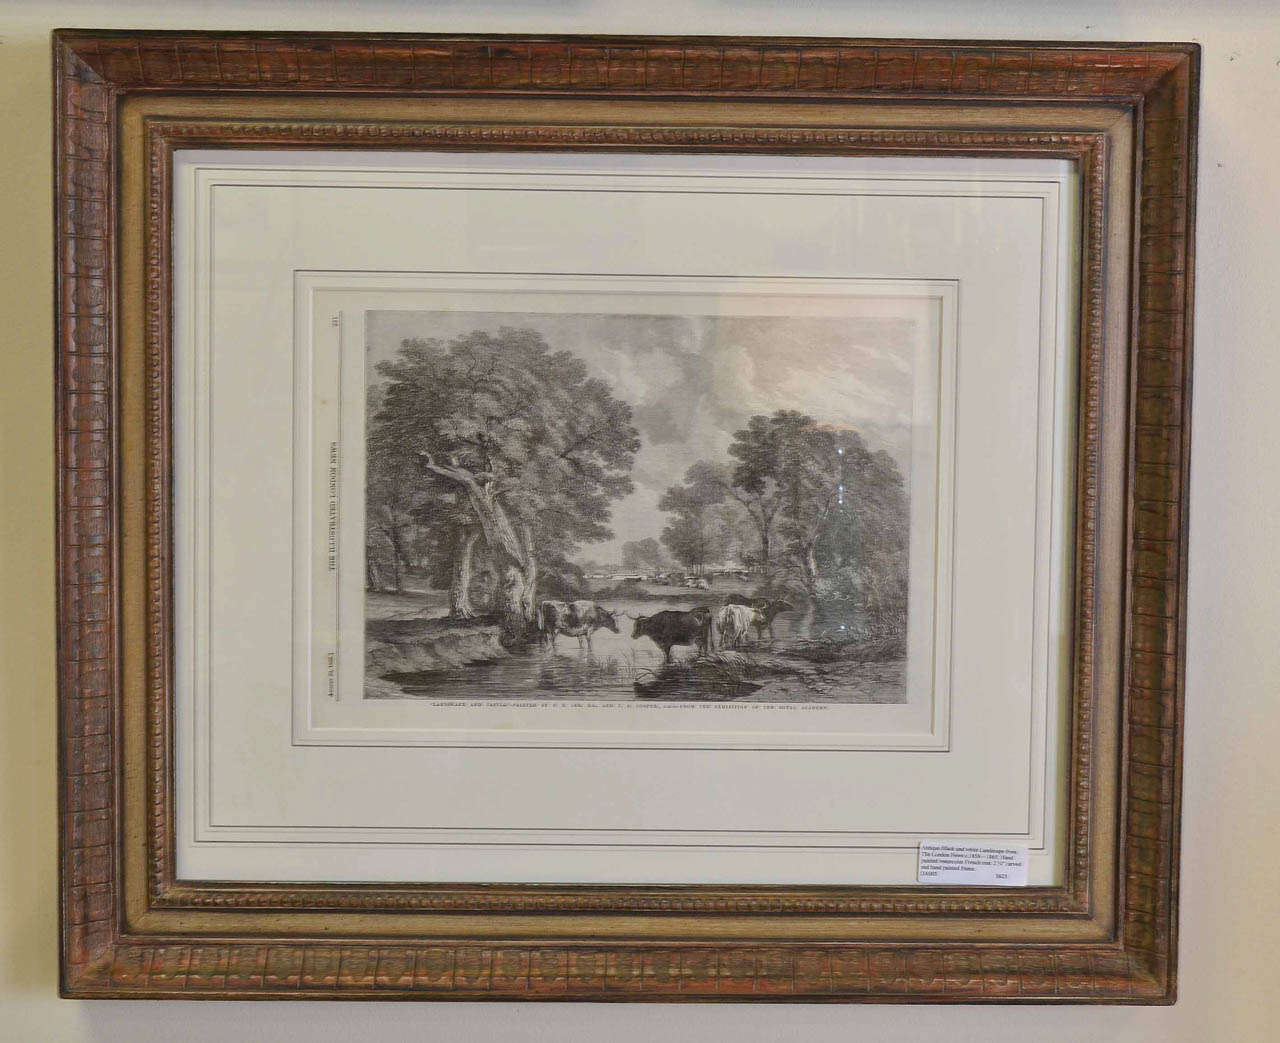 Edwardian Antique Black and White Landscape from the London News circa 1856-1865